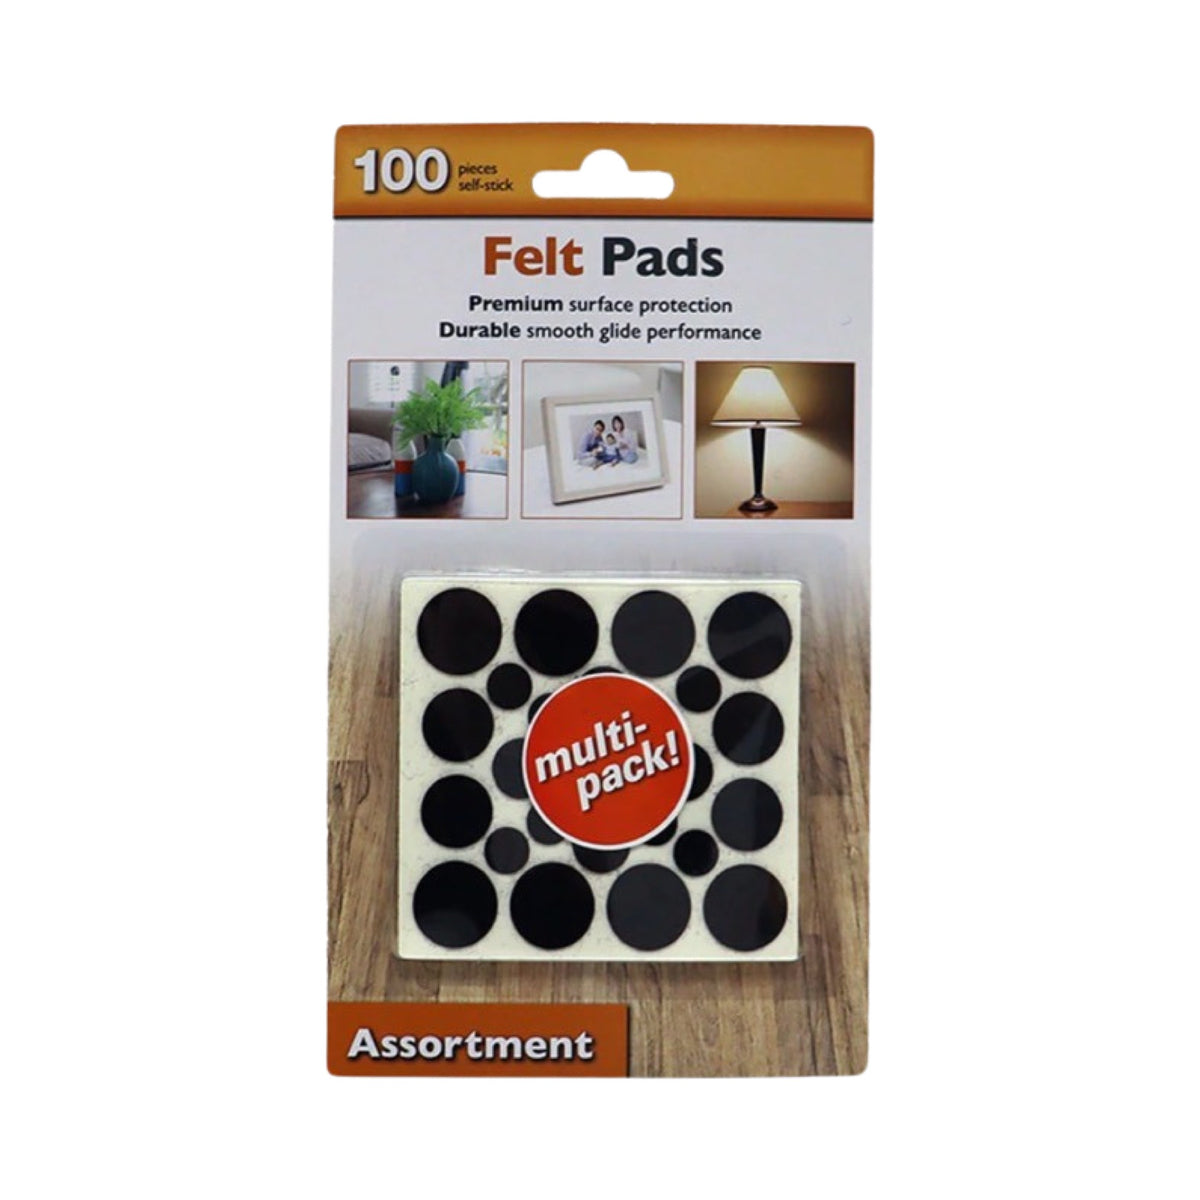 100pc Premium Surface Protection Felt Pads In 3 Sizes - Durable Smooth Glide